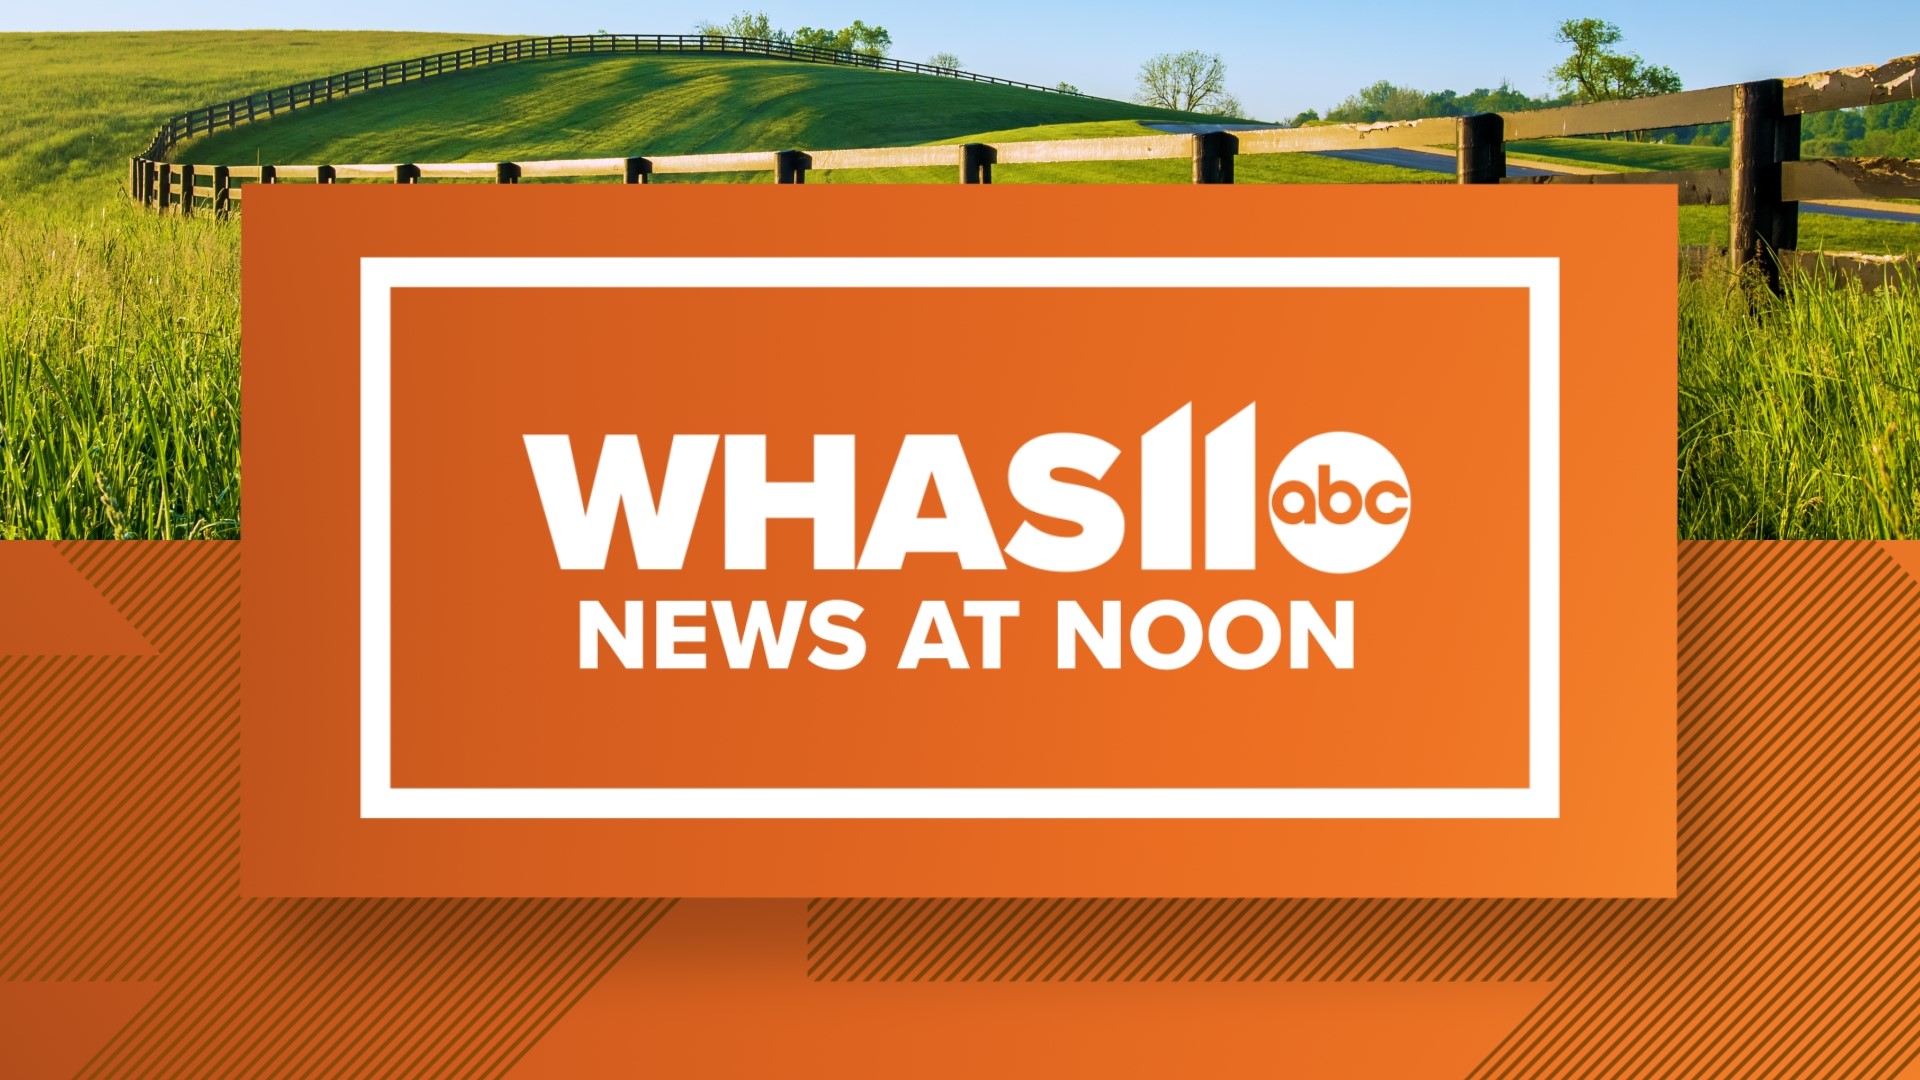 The latest local, regional and national news events are presented by the WHAS11 News Team, along with updated sports, weather and traffic.